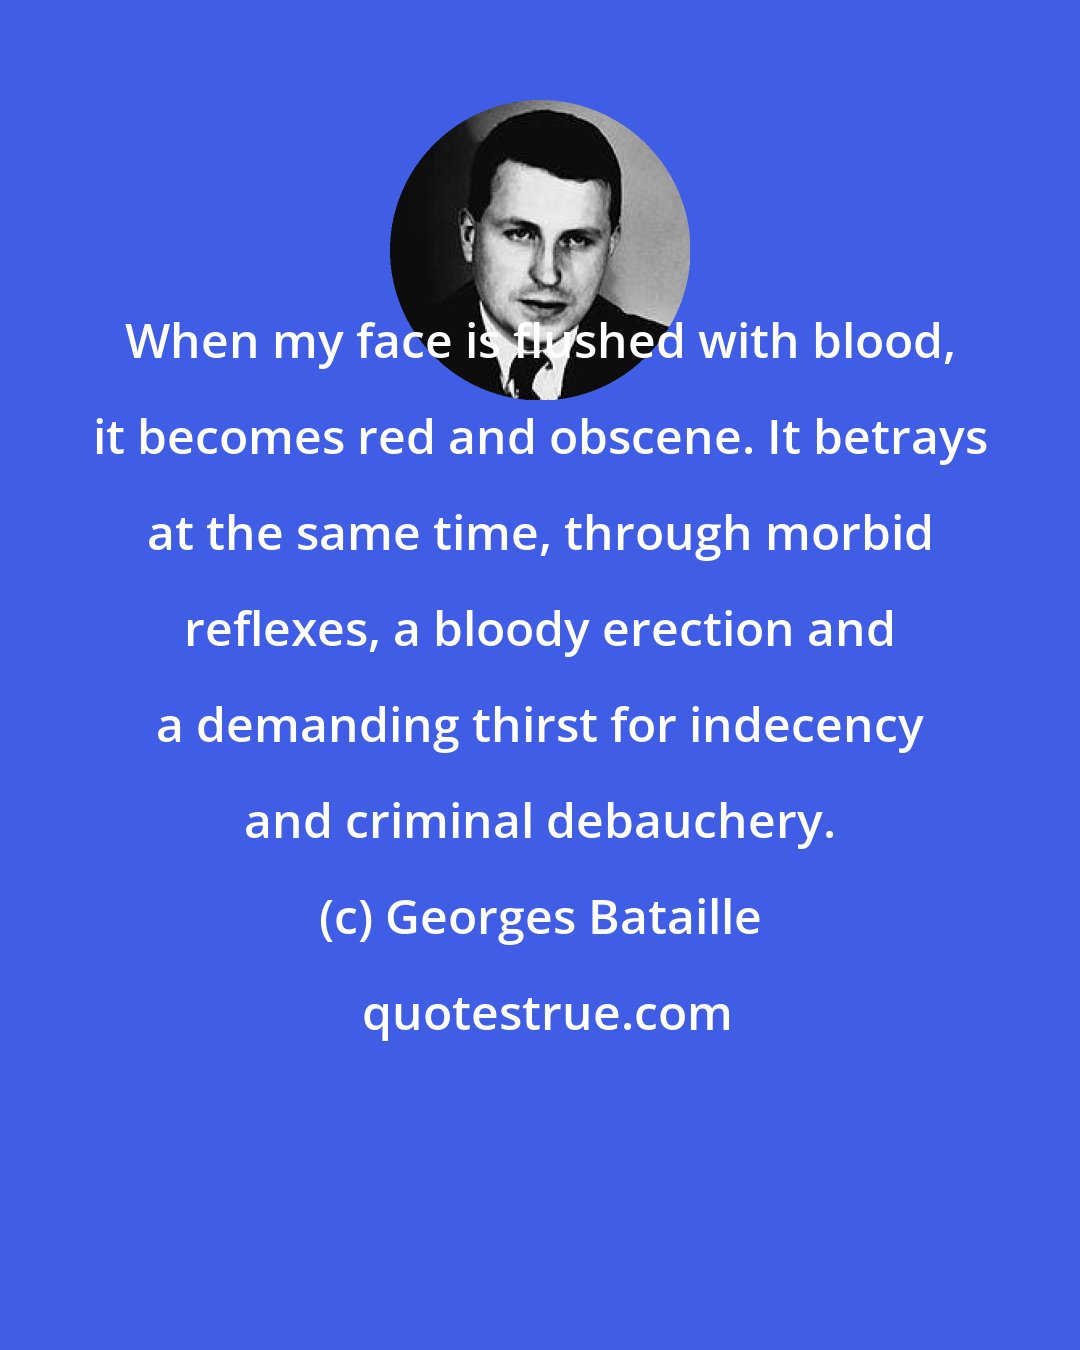 Georges Bataille: When my face is flushed with blood, it becomes red and obscene. It betrays at the same time, through morbid reflexes, a bloody erection and a demanding thirst for indecency and criminal debauchery.